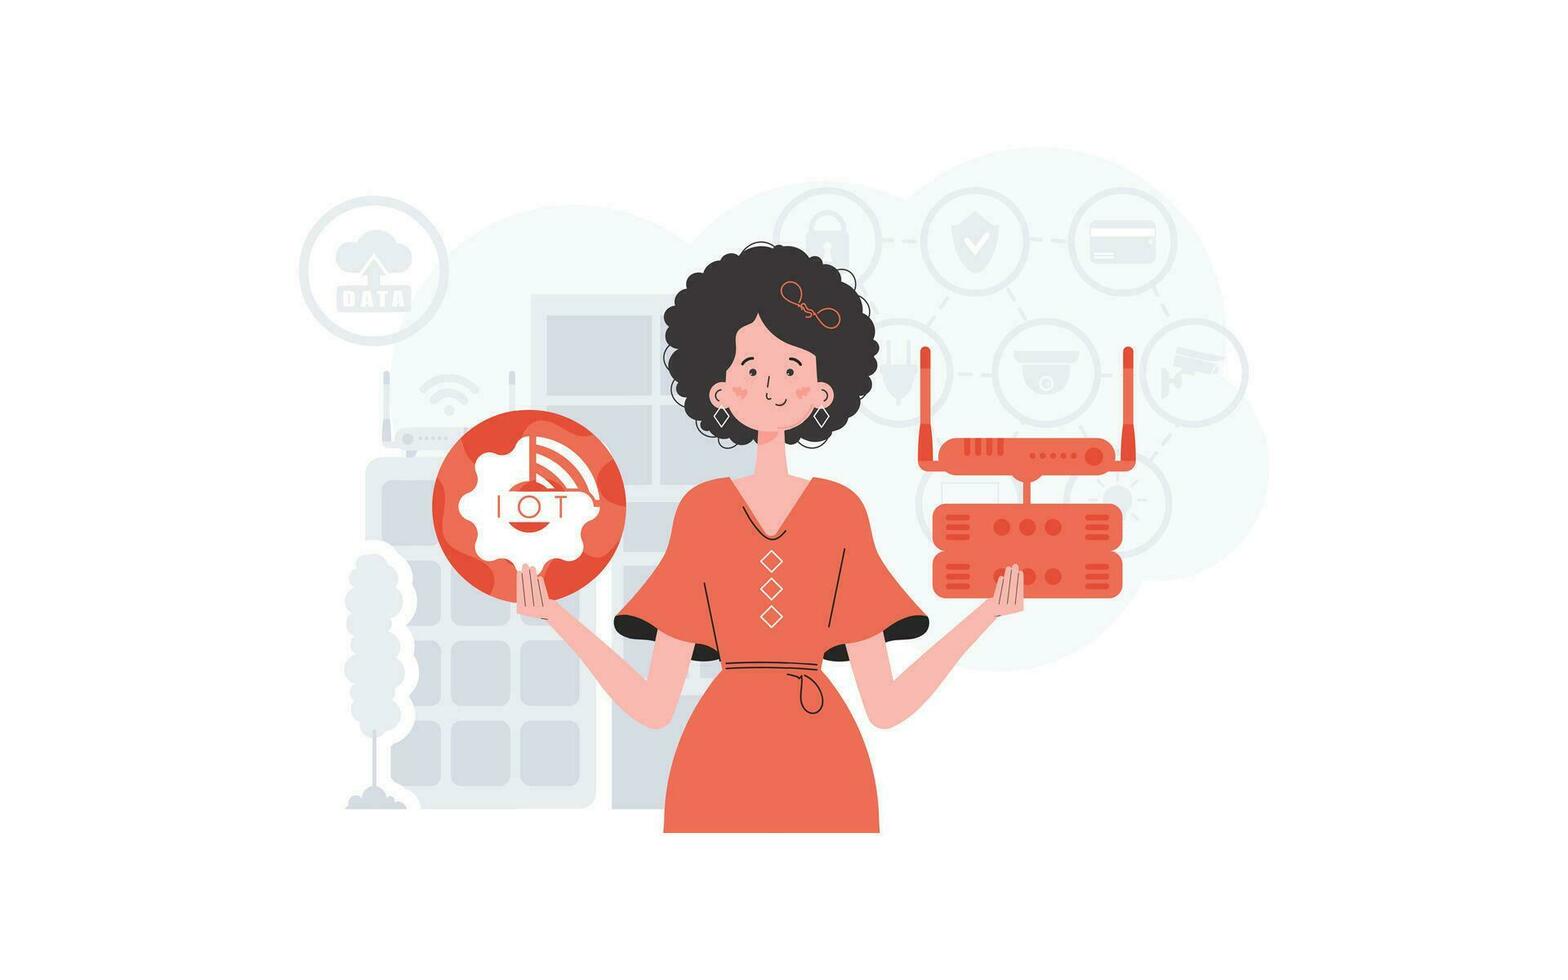 IoT concept. A woman is holding an internet thing icon in her hands. Router and server. Good for websites and presentations. Vector illustration in trendy flat style.